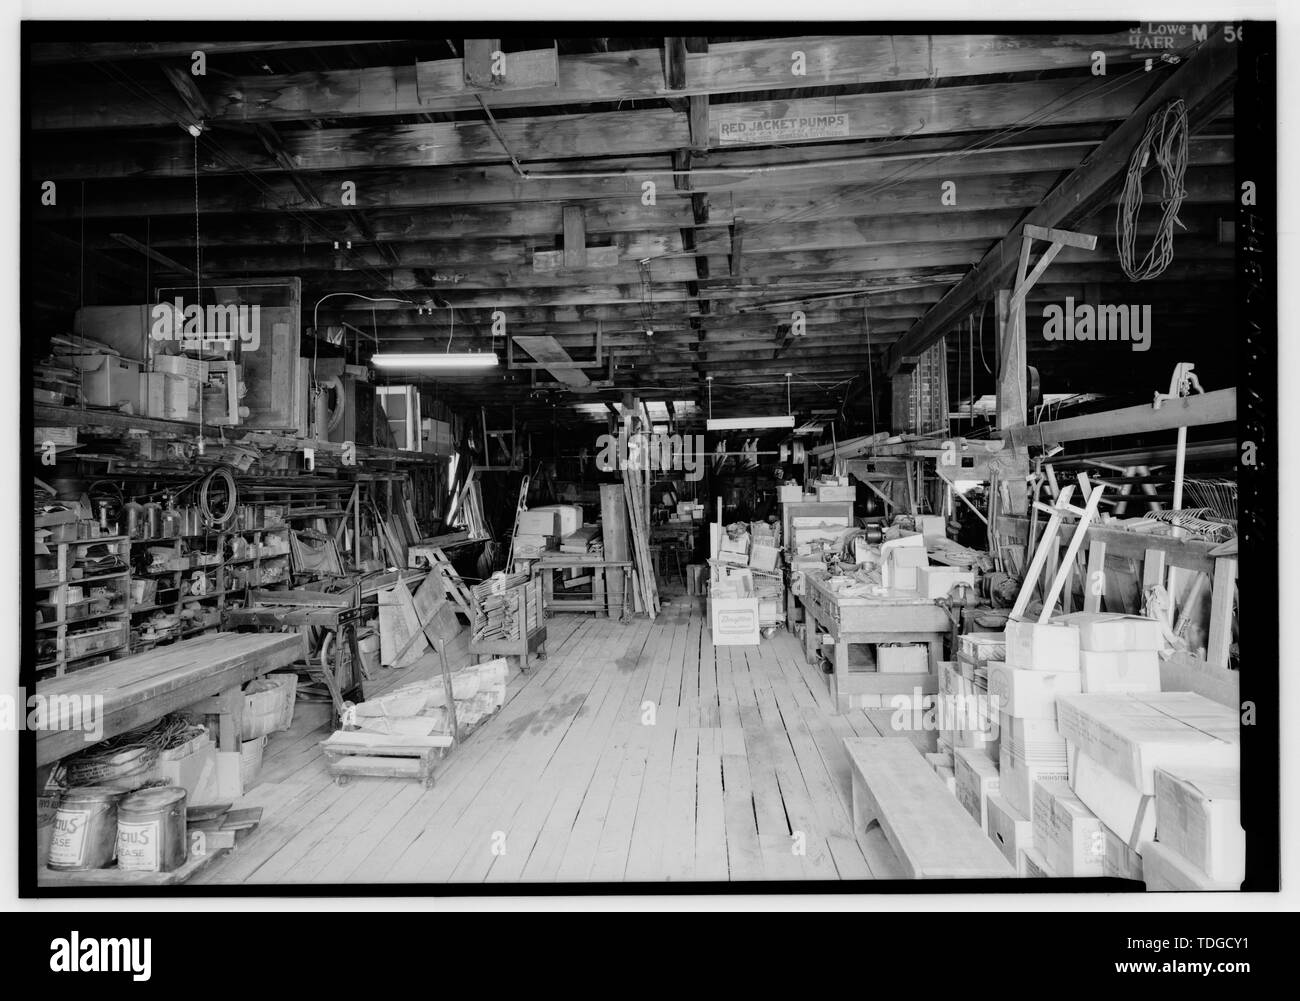 NORTH THROUGH SHEET METAL AND ASSEMBLY AREA IN SOUTHWESTERN QUADRANT OF FACTORY AS SEEN FROM DOORWAY IN SOUTH FRONT WALL. ALONG WEST INTERIOR WALL ARE SHELVES BEARING WATER PUMPS, PARTS FOR PUMPS AND WATER SUPPLY EQUIPMENT, AND NEW OLD STOCK MERCHANDISE. IN FRONT OF THE WALL ARE THE CIRCA 1900 SHEET METAL SHEAR AND CIRCA 1900 SHEET METAL BRAKE. AT THE RIGHT SIDE OF THE IMAGE ALONGSIDE VERTICAL CEILING SUPPORTS IS METAL-COVERED BENCH FOR SHEET METAL WORK. - Kregel Windmill Company Factory, 1416 Central Avenue, Nebraska City, Otoe County, NE Stock Photo